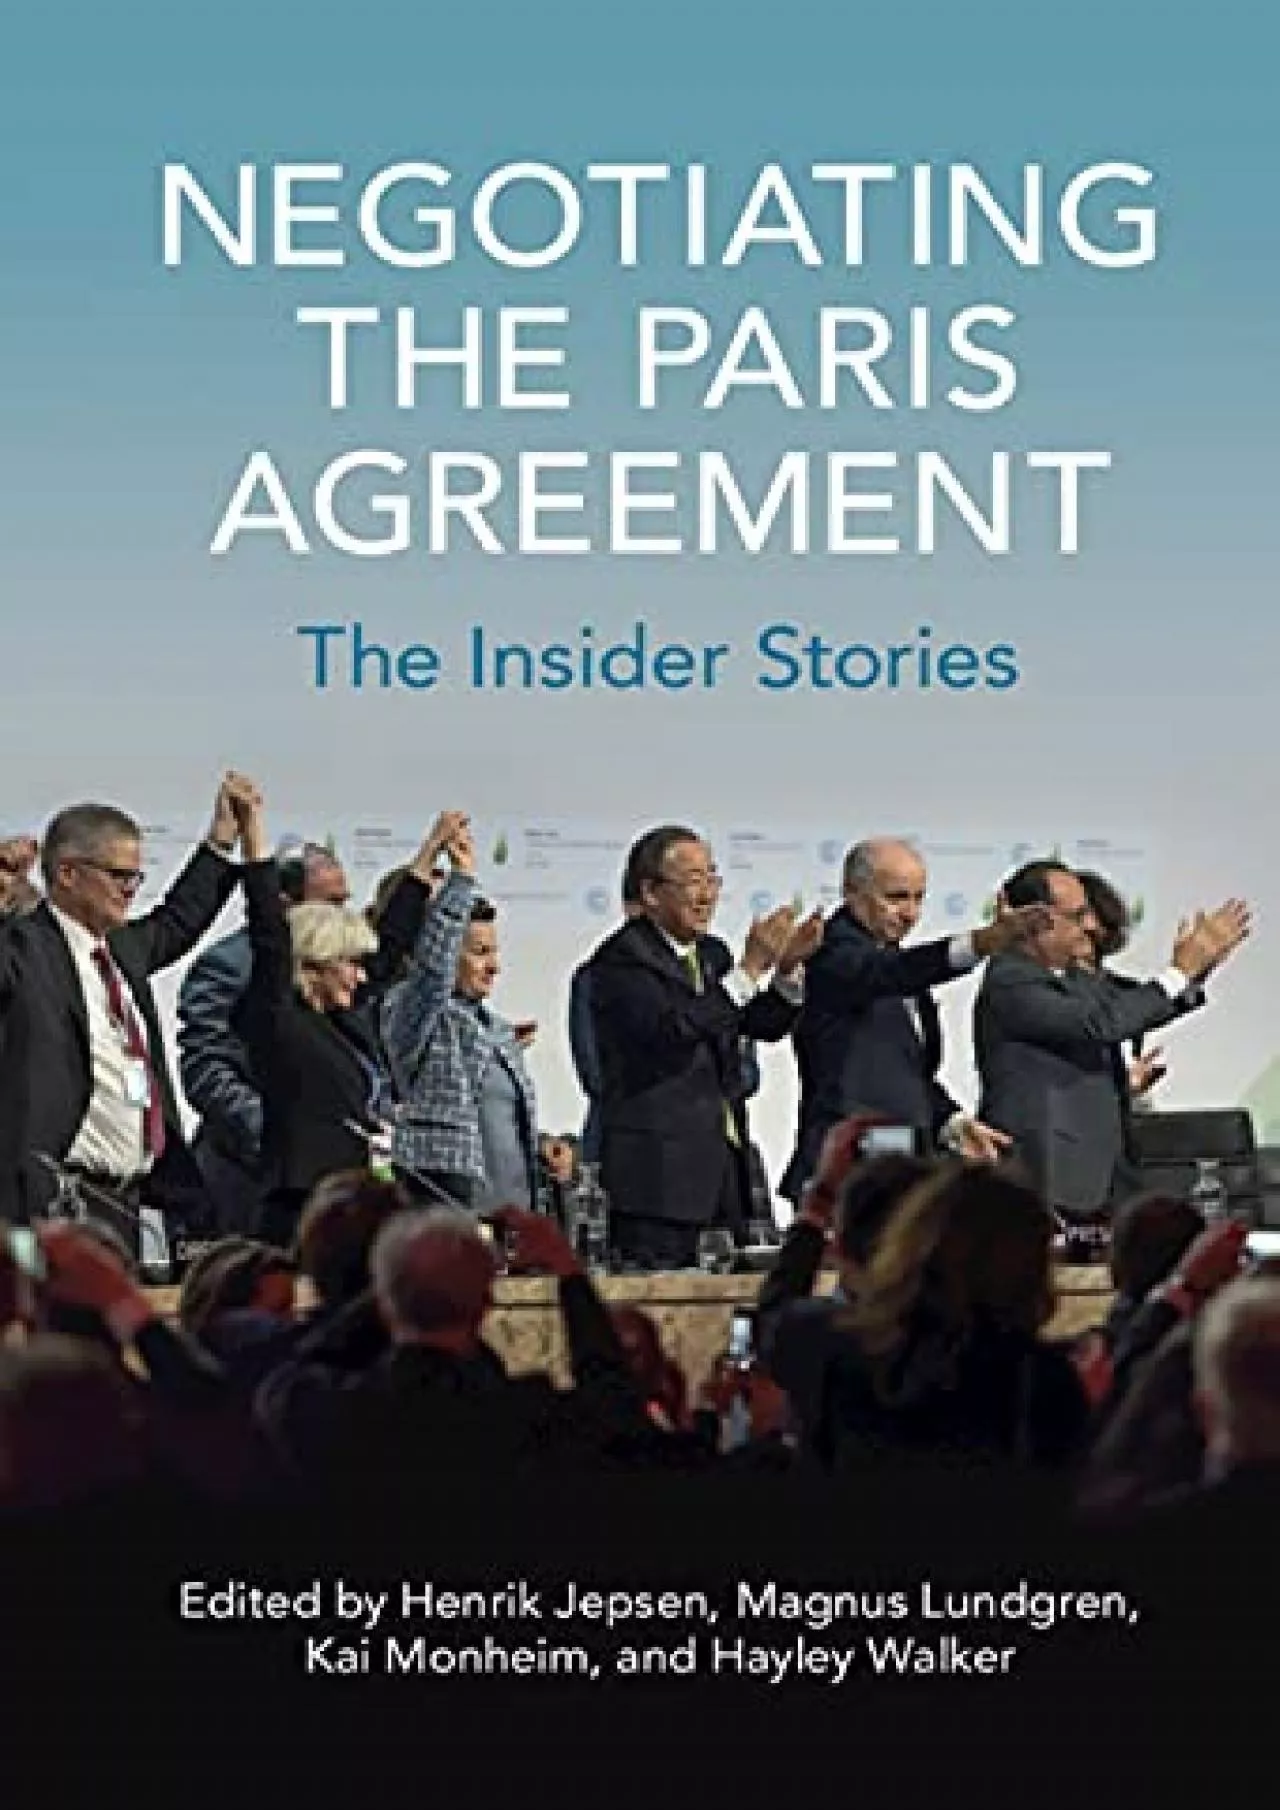 [PDF] DOWNLOAD Negotiating the Paris Agreement: The Insider Stories